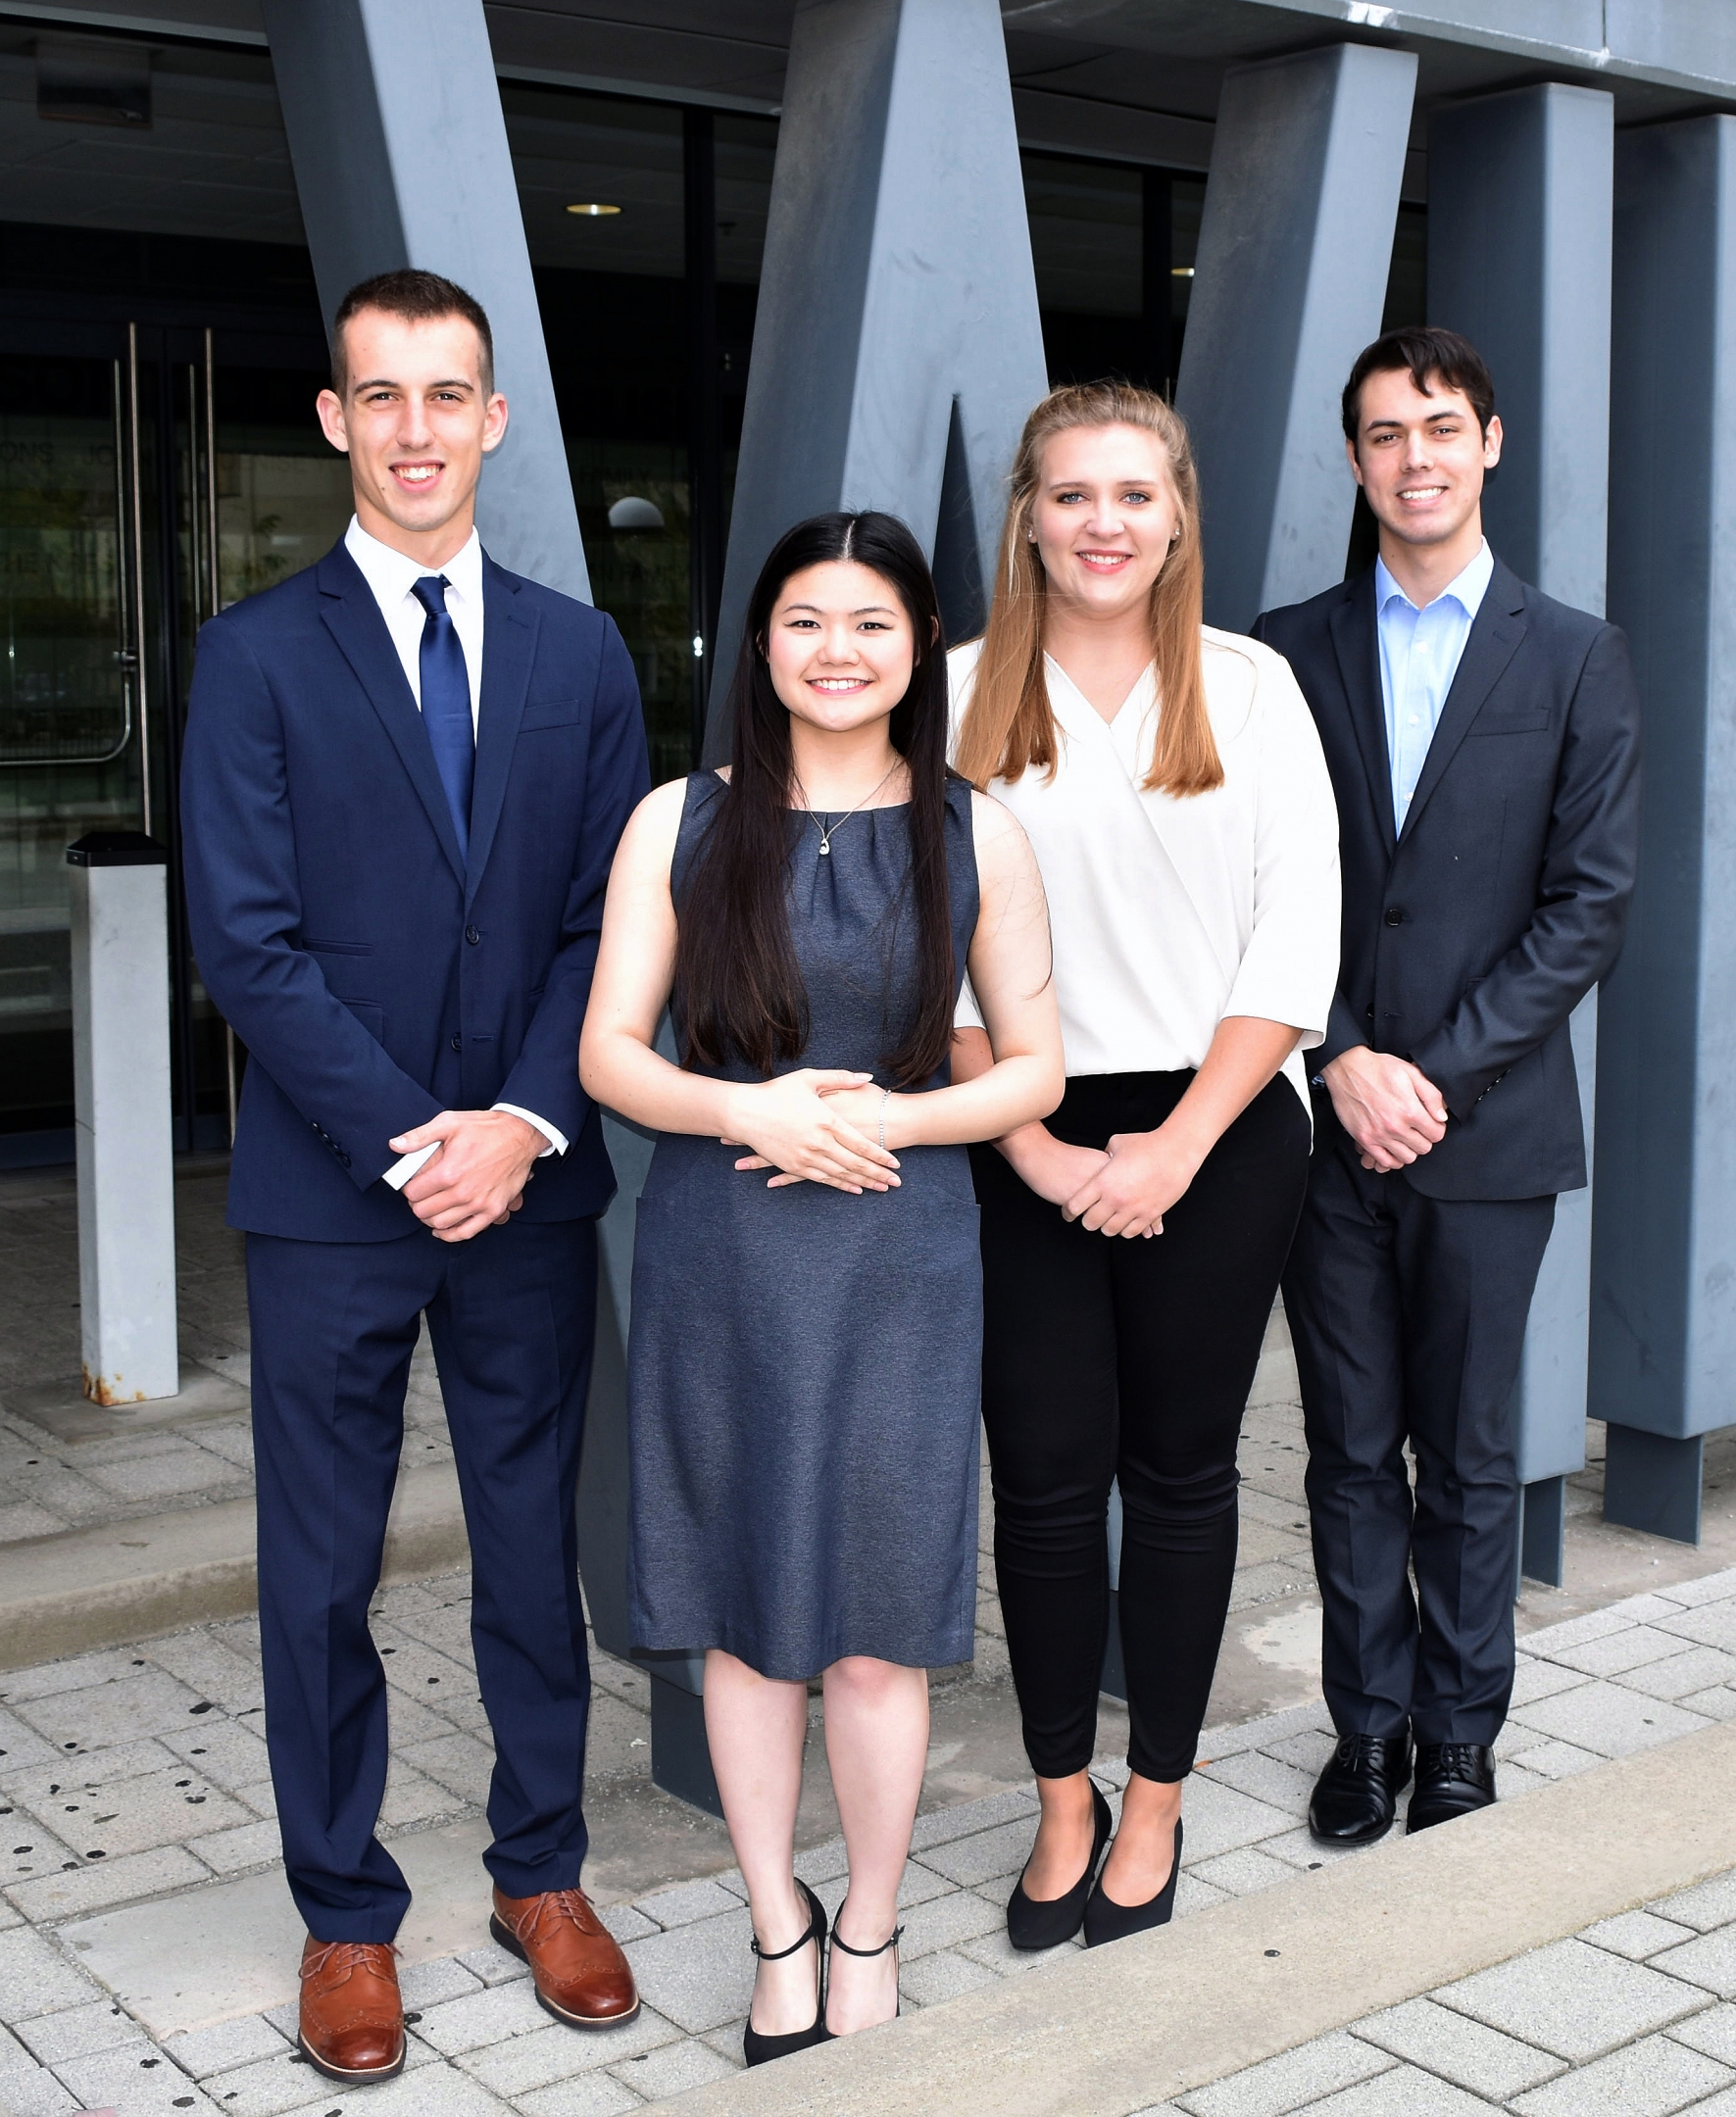 YSU students, from the left, Ryan Sheffield, Alanis Chew, Jenna Binsley and Richard Fisher, has been selected as Beeghly Fellows for Fall 2019